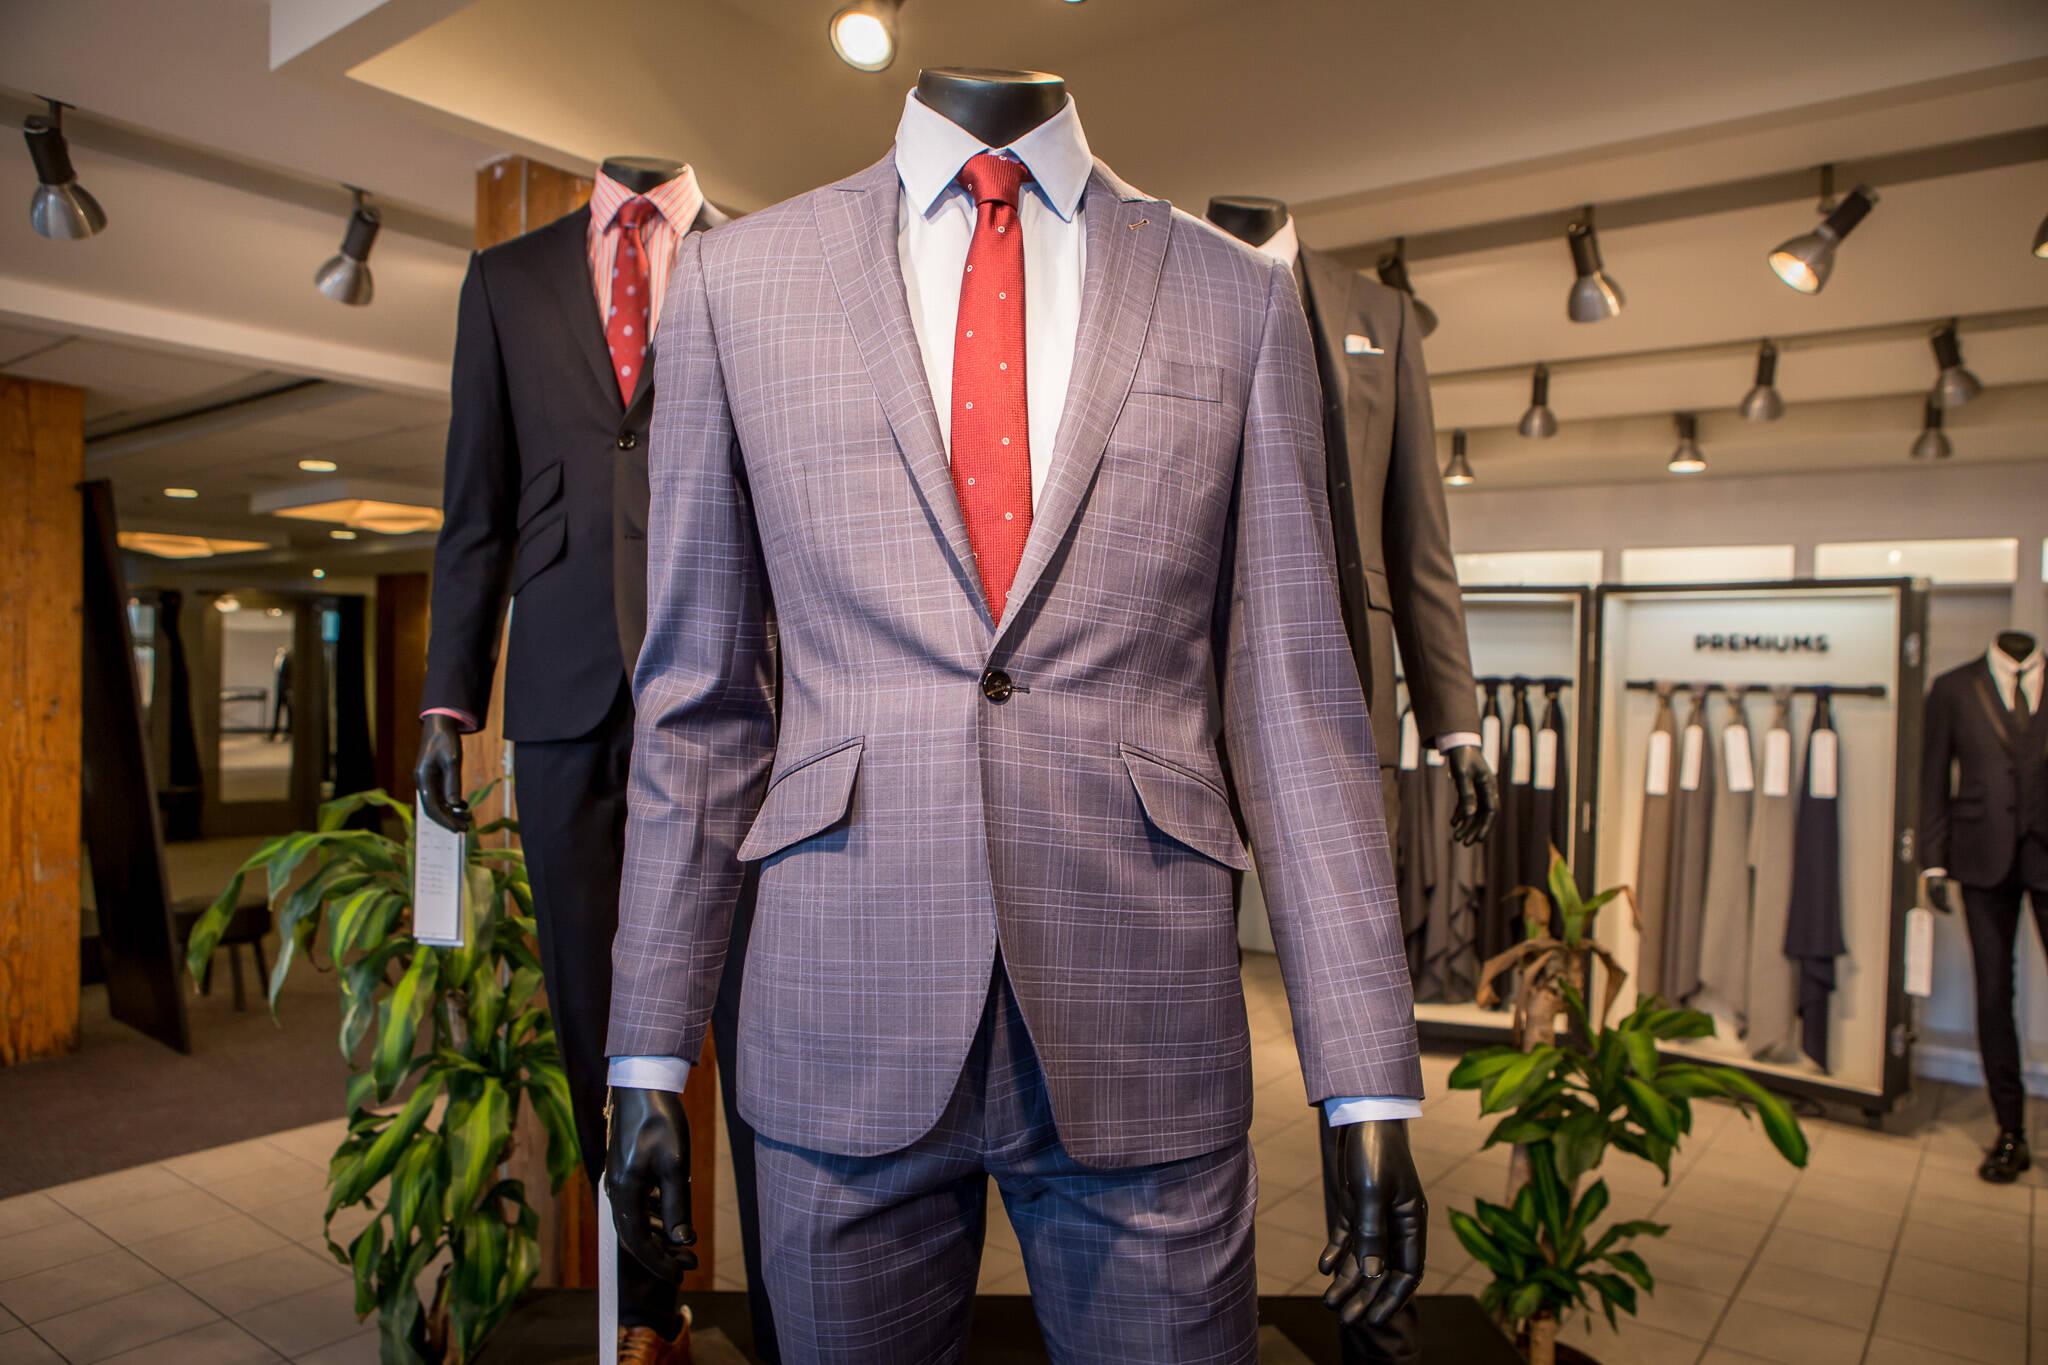 The Best Place to Buy a Suit in Toronto